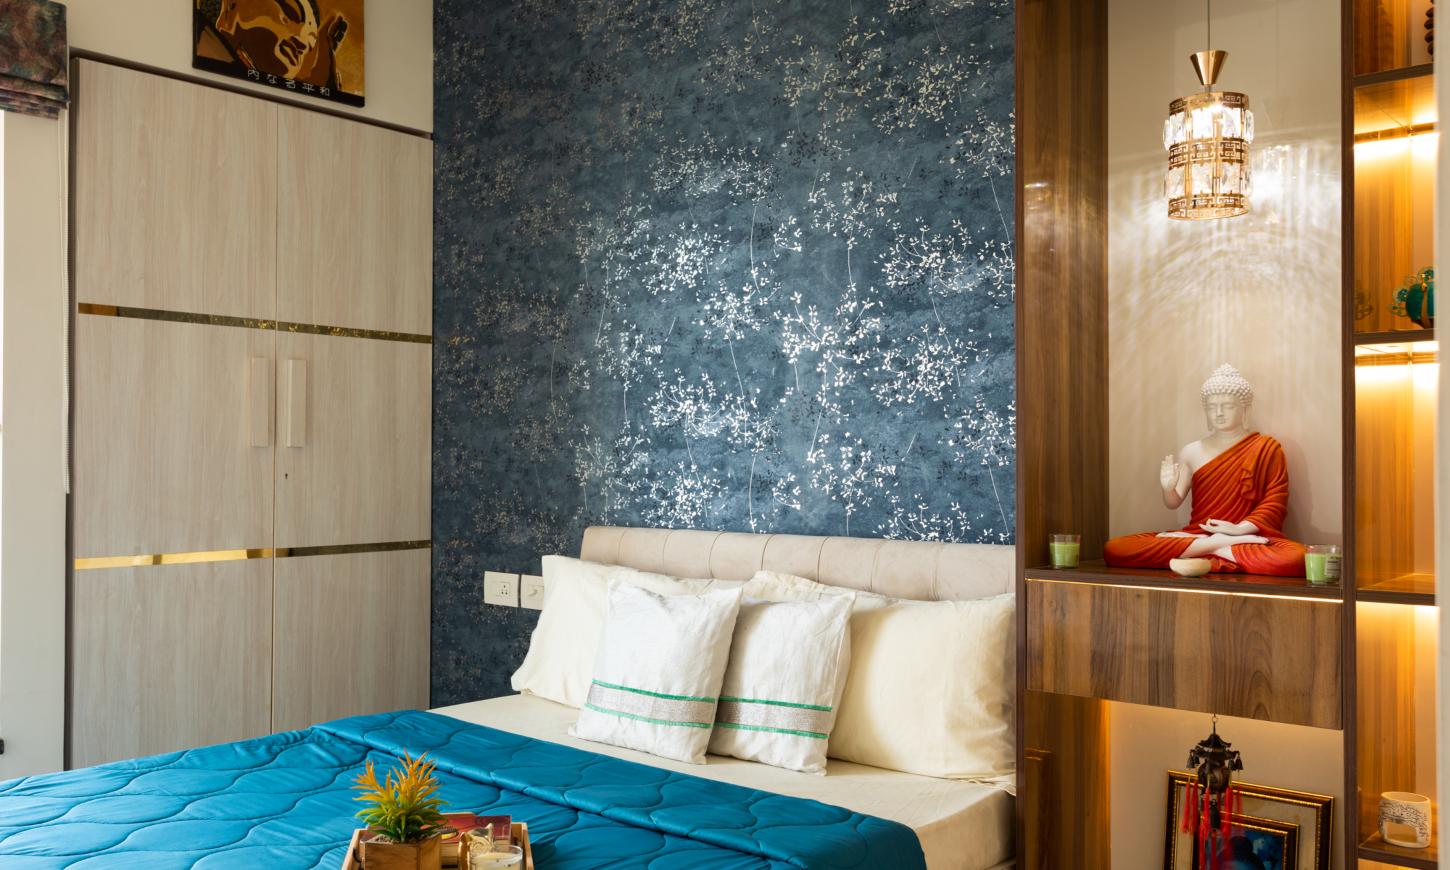 Designcafe designed the master bedroom of a 2 BHK apartment in Thane, featuring a built-in wardrobe